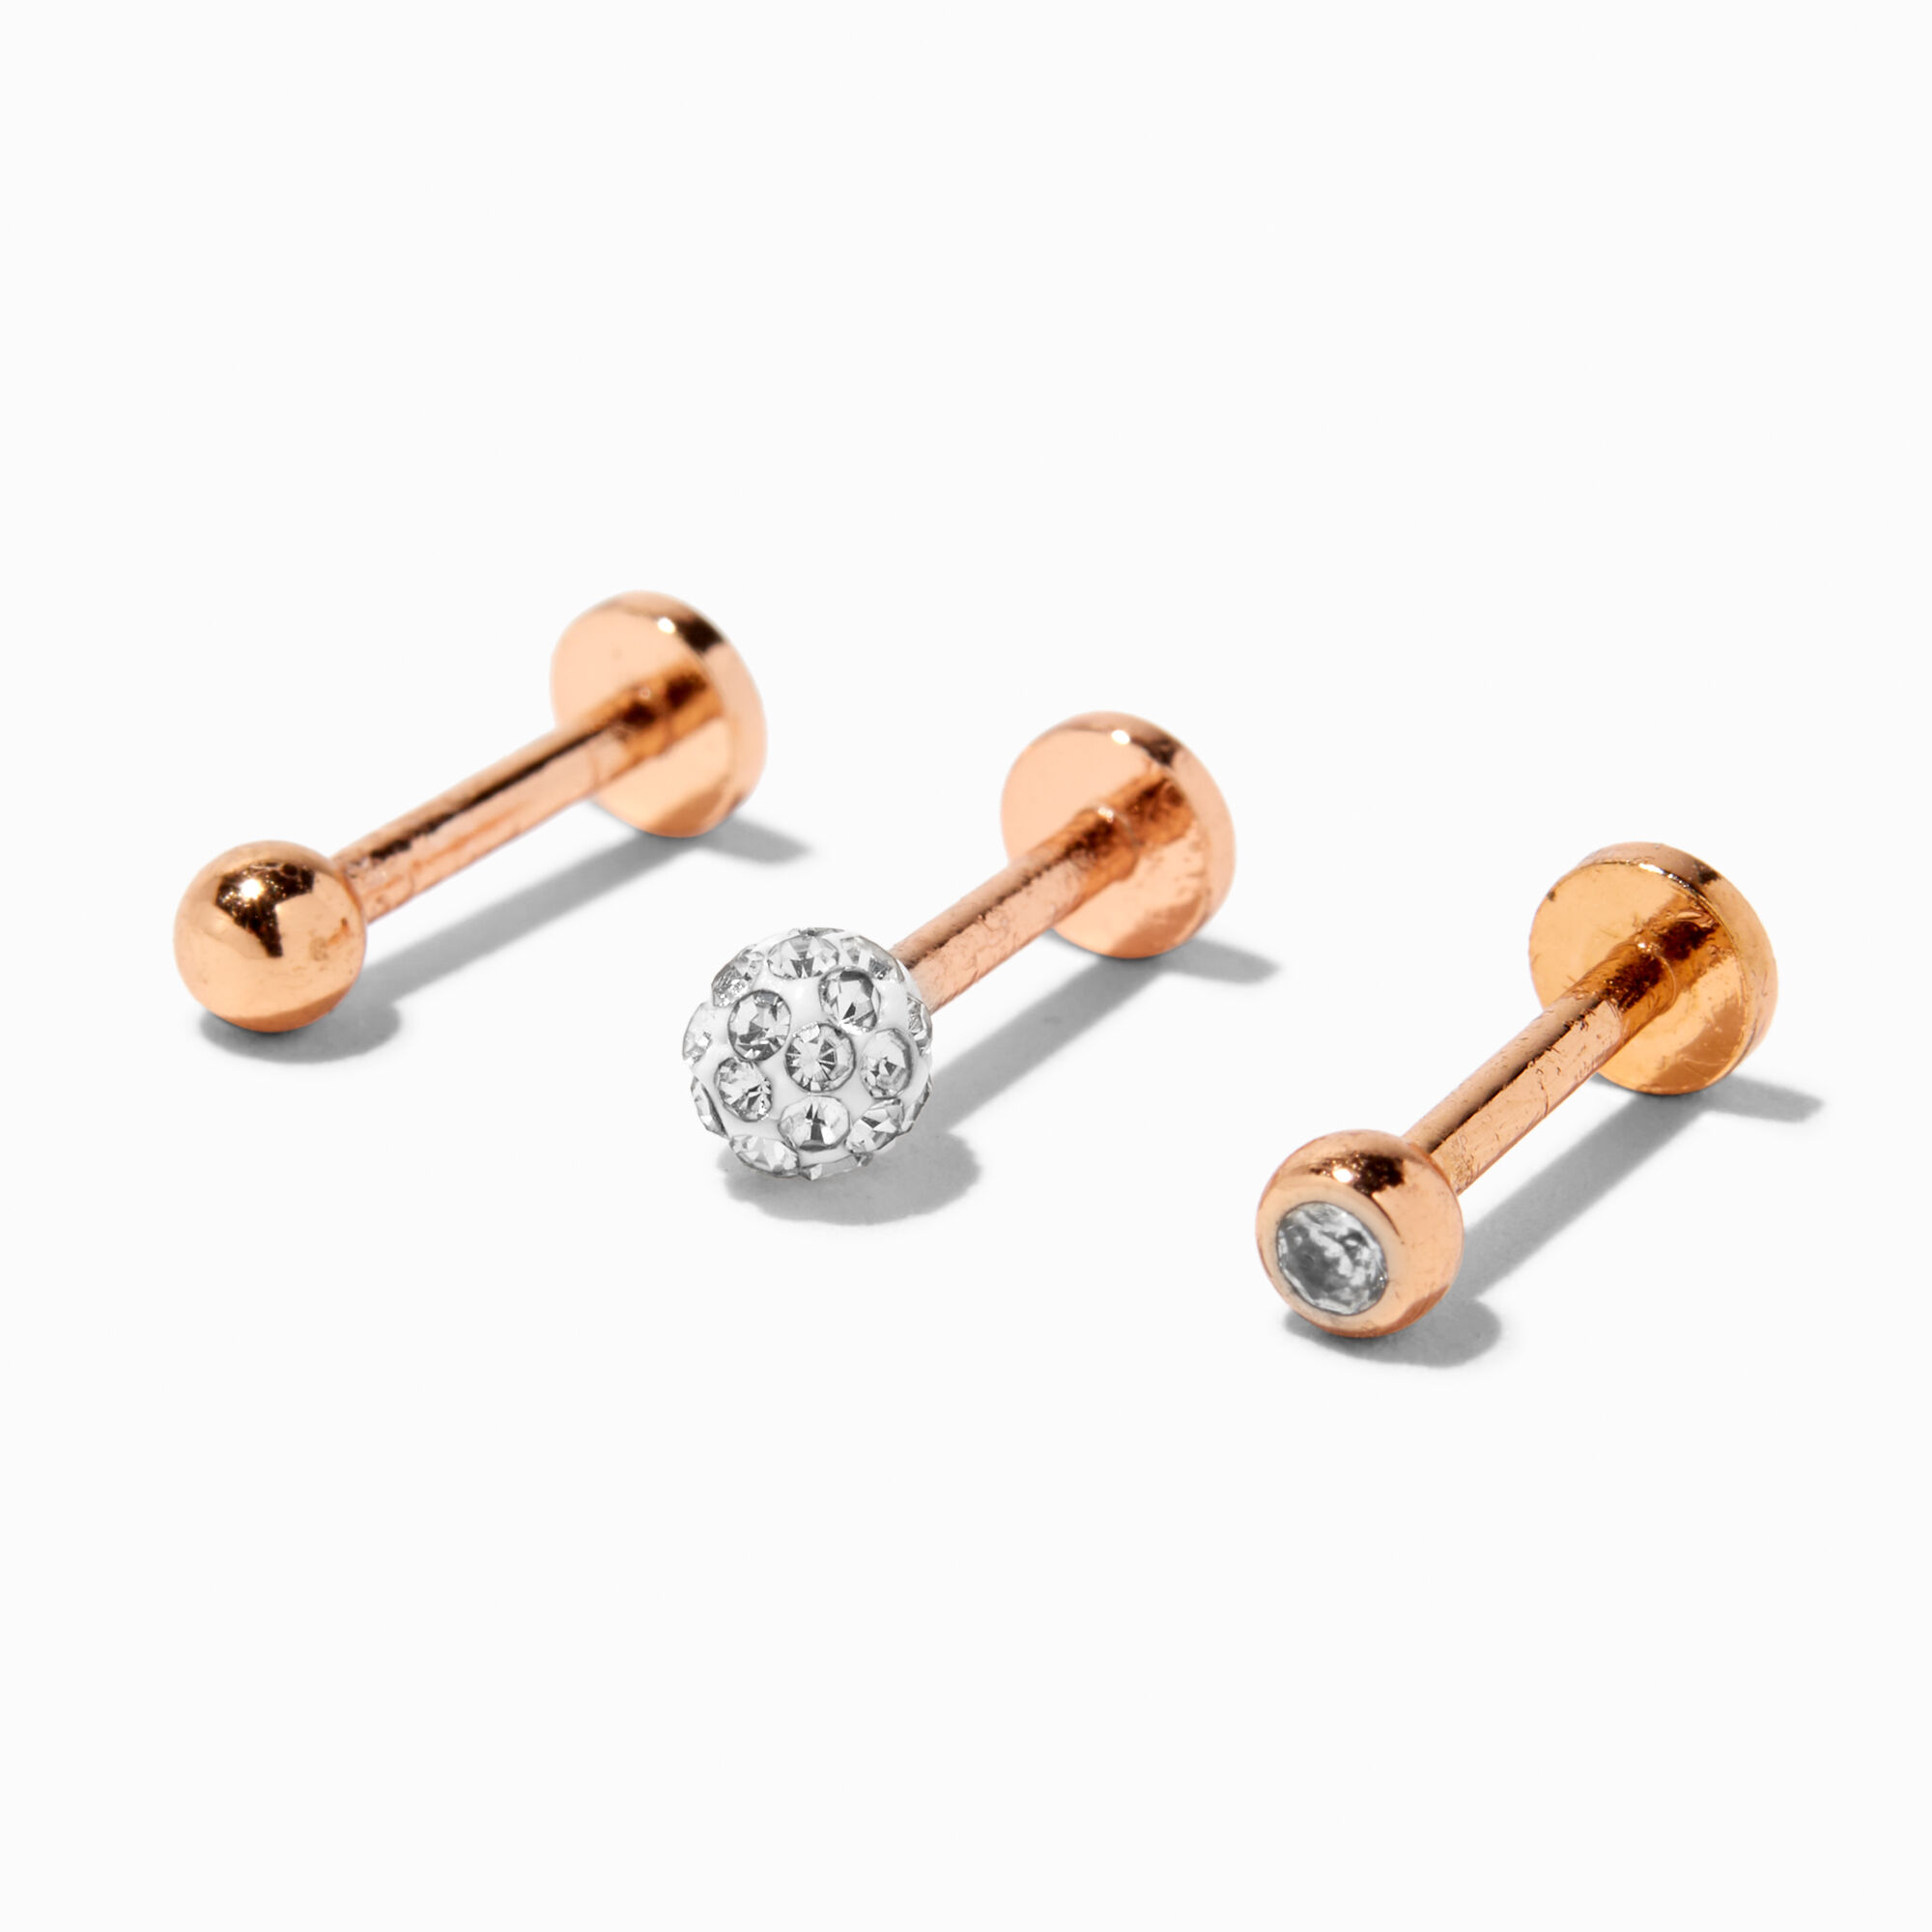 View Claires Tone 16G Crystal Labret Studs 3 Pack Gold information